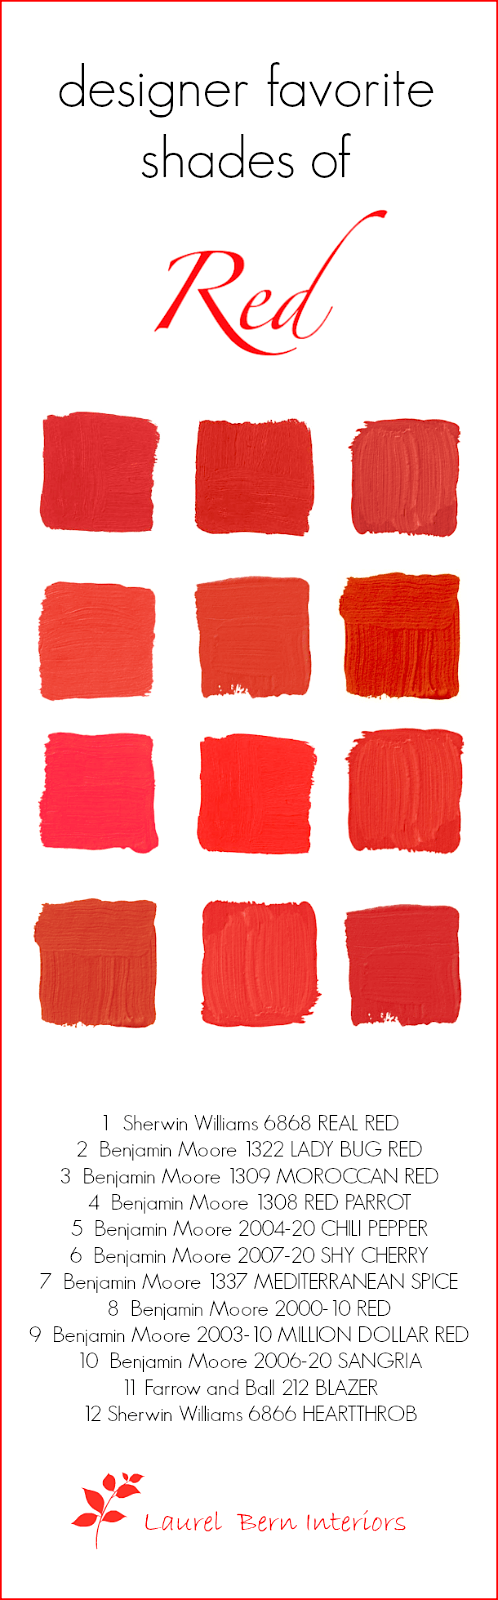 designer-favorite-shades-of-red paint colors